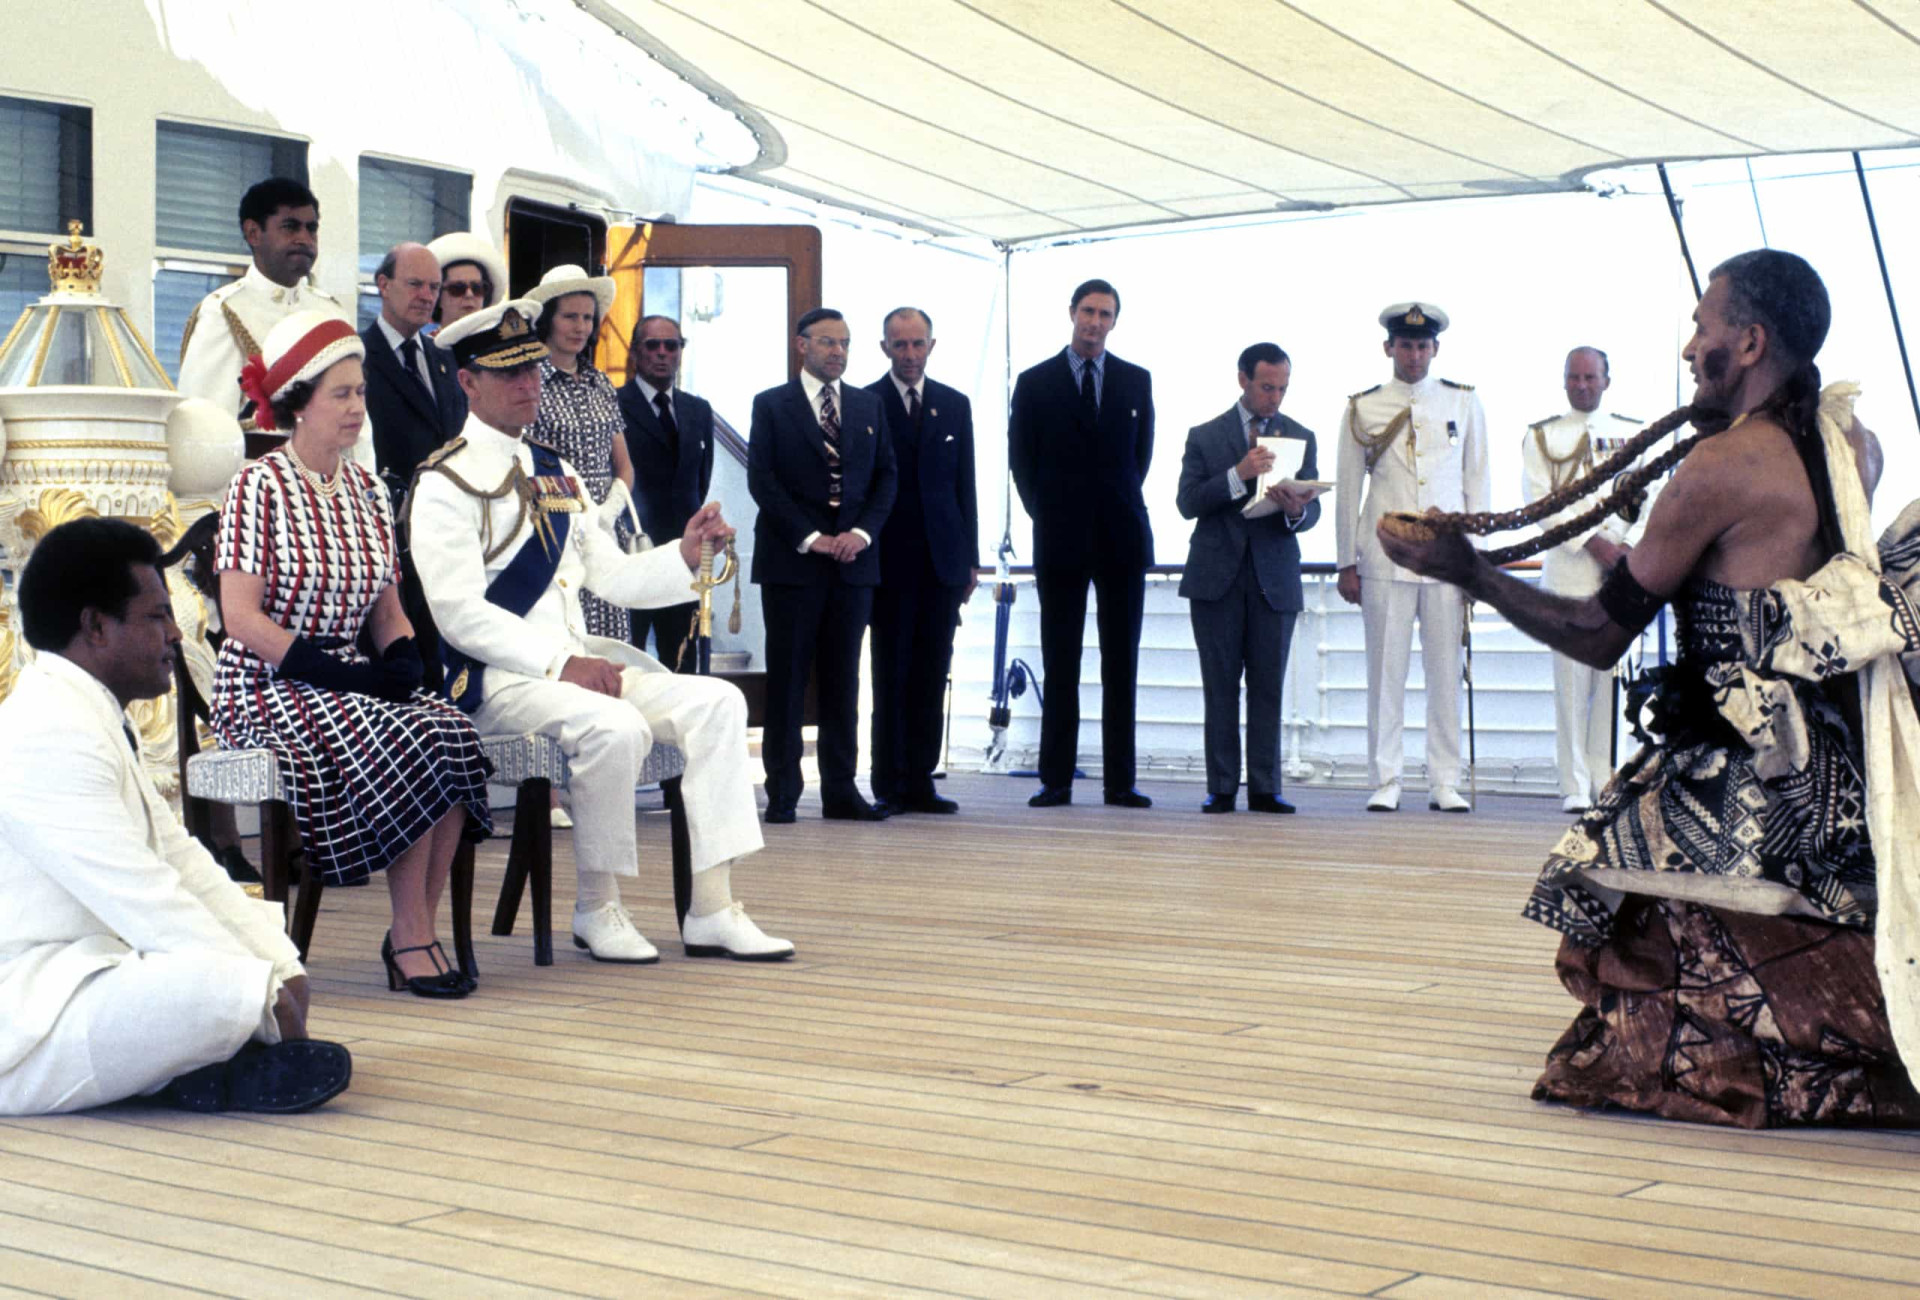 <p>Later in the summer, the Queen and Prince Philip embarked on a Commonwealth visit that first brought them to island nations such as Fiji and Tonga. Pictured is the royal couple receiving and being entertained by Fijian folk and traditional dancers on board  <em>Britannia</em>. The voyage continued later with longer stints in New Zealand and Australia.</p><p><a href="https://www.msn.com/en-sg/community/channel/vid-7xx8mnucu55yw63we9va2gwr7uihbxwc68fxqp25x6tg4ftibpra?cvid=94631541bc0f4f89bfd59158d696ad7e">Follow us and access great exclusive content every day</a></p>